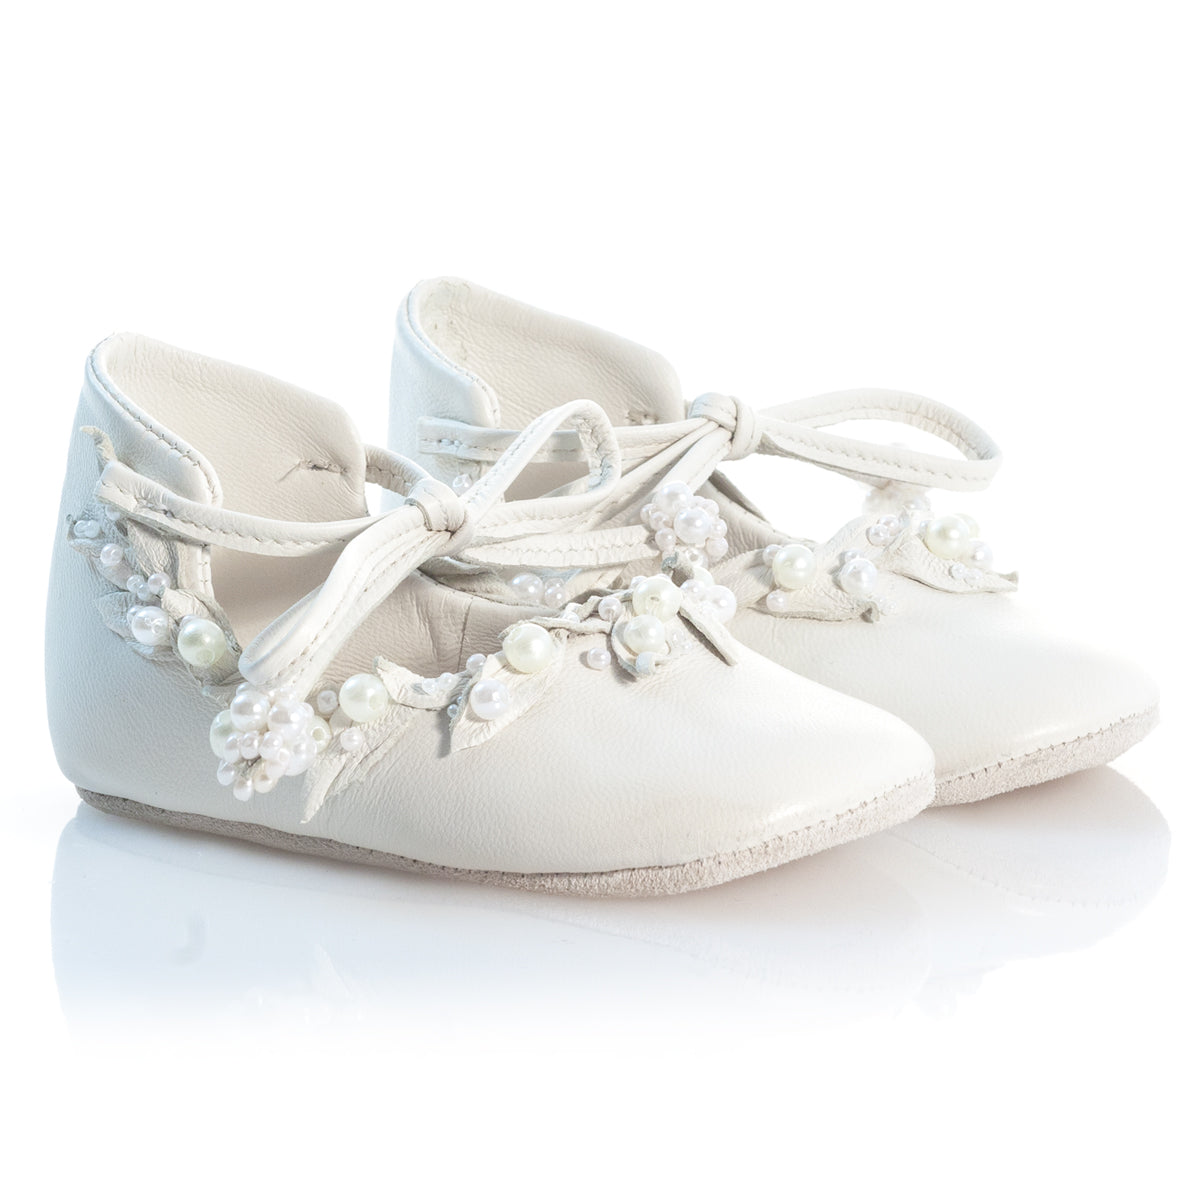 VIBYS WHITE FOREST handmade white leather girl shoes for wedding party christening special event